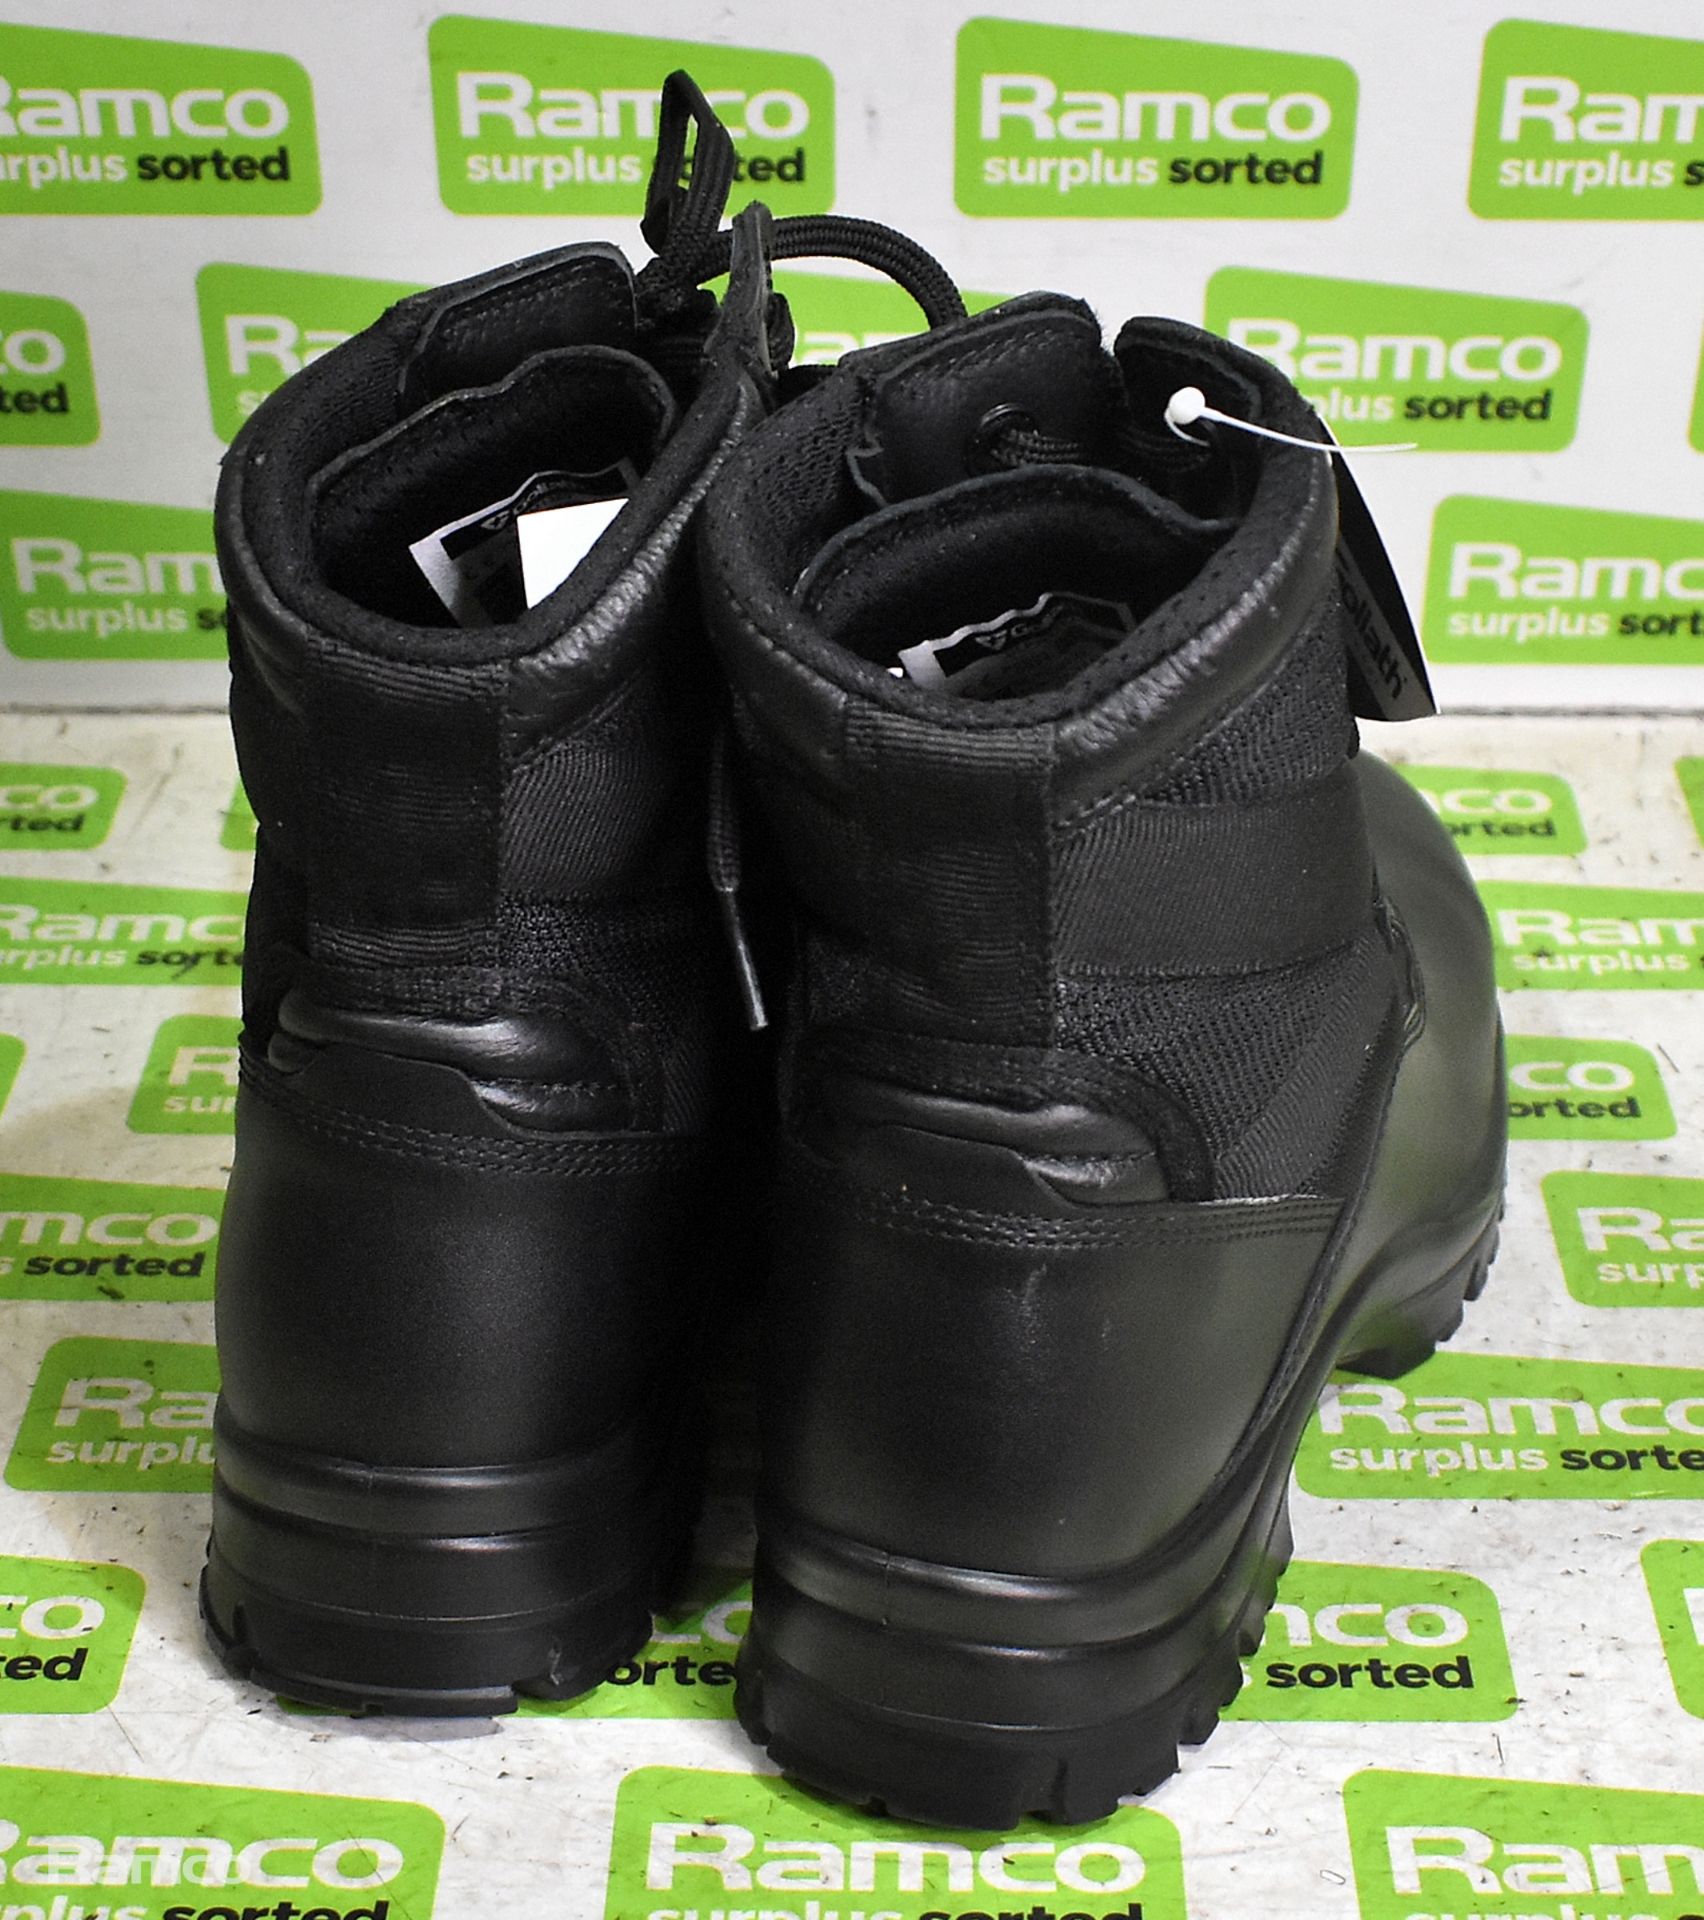 3x pairs of Goliath warm weather boots - Size 7L - Image 3 of 6